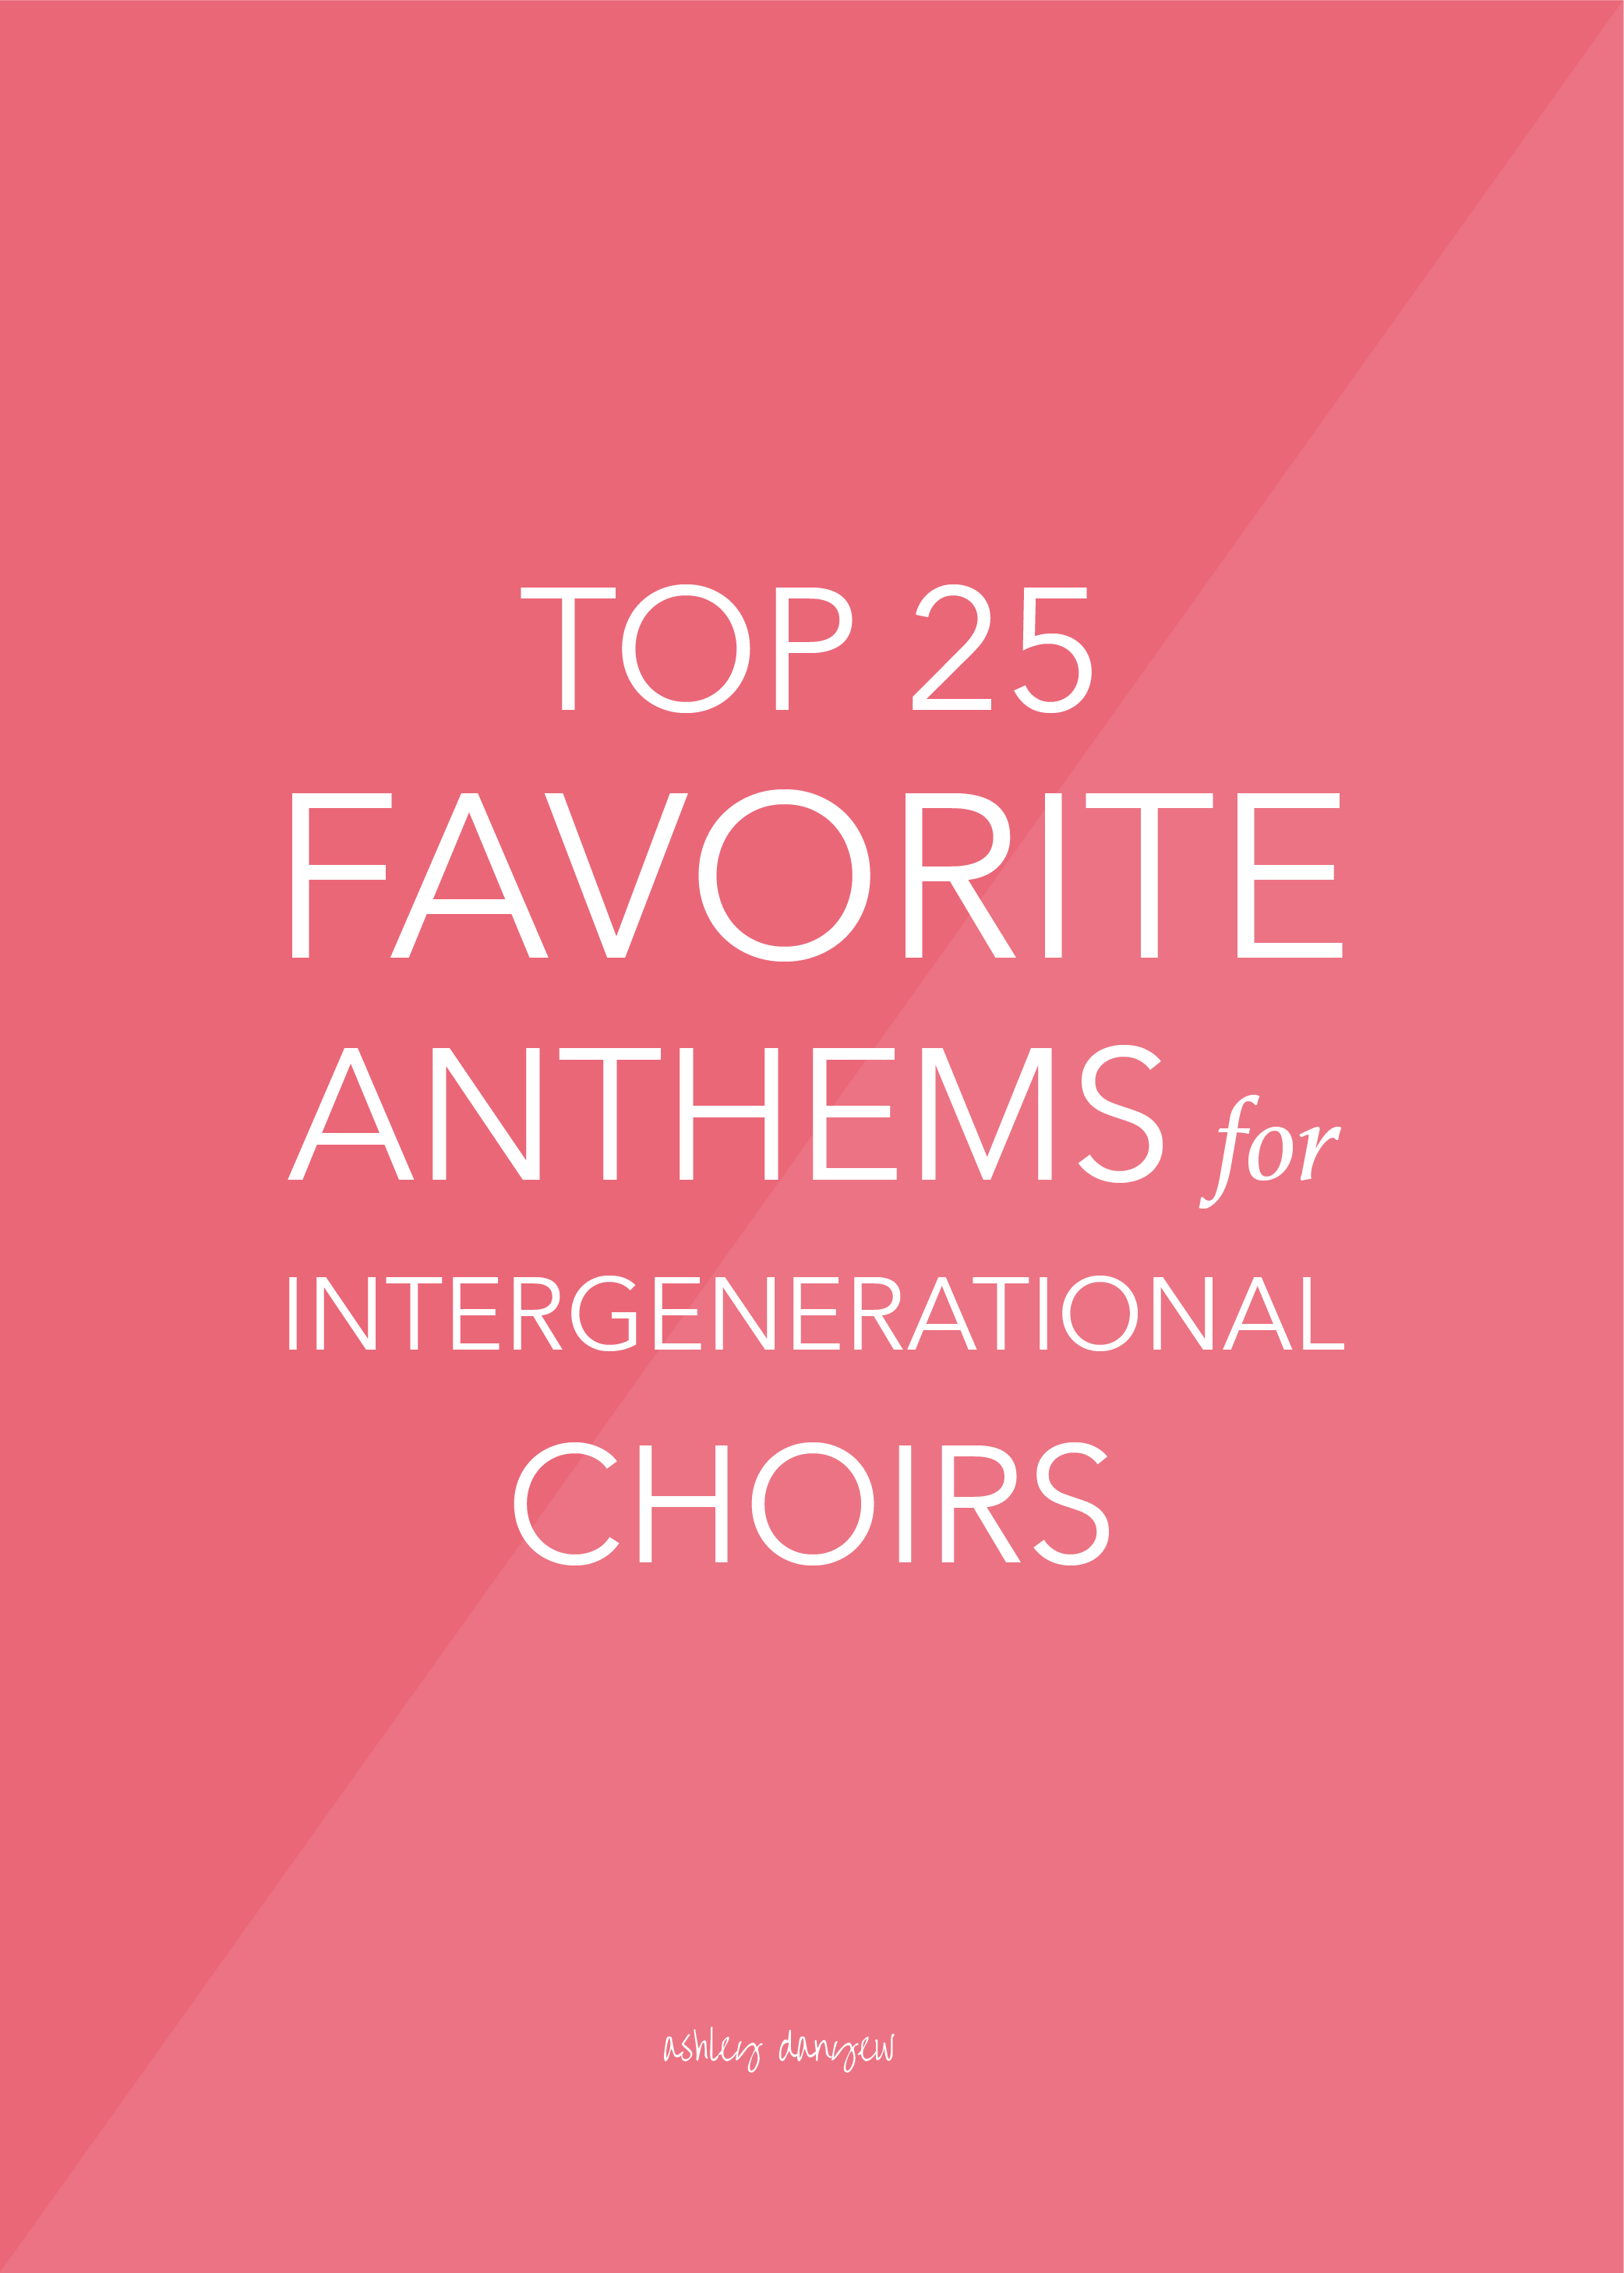 Top 25 Favorite Anthems for Intergenerational Choirs-13.png